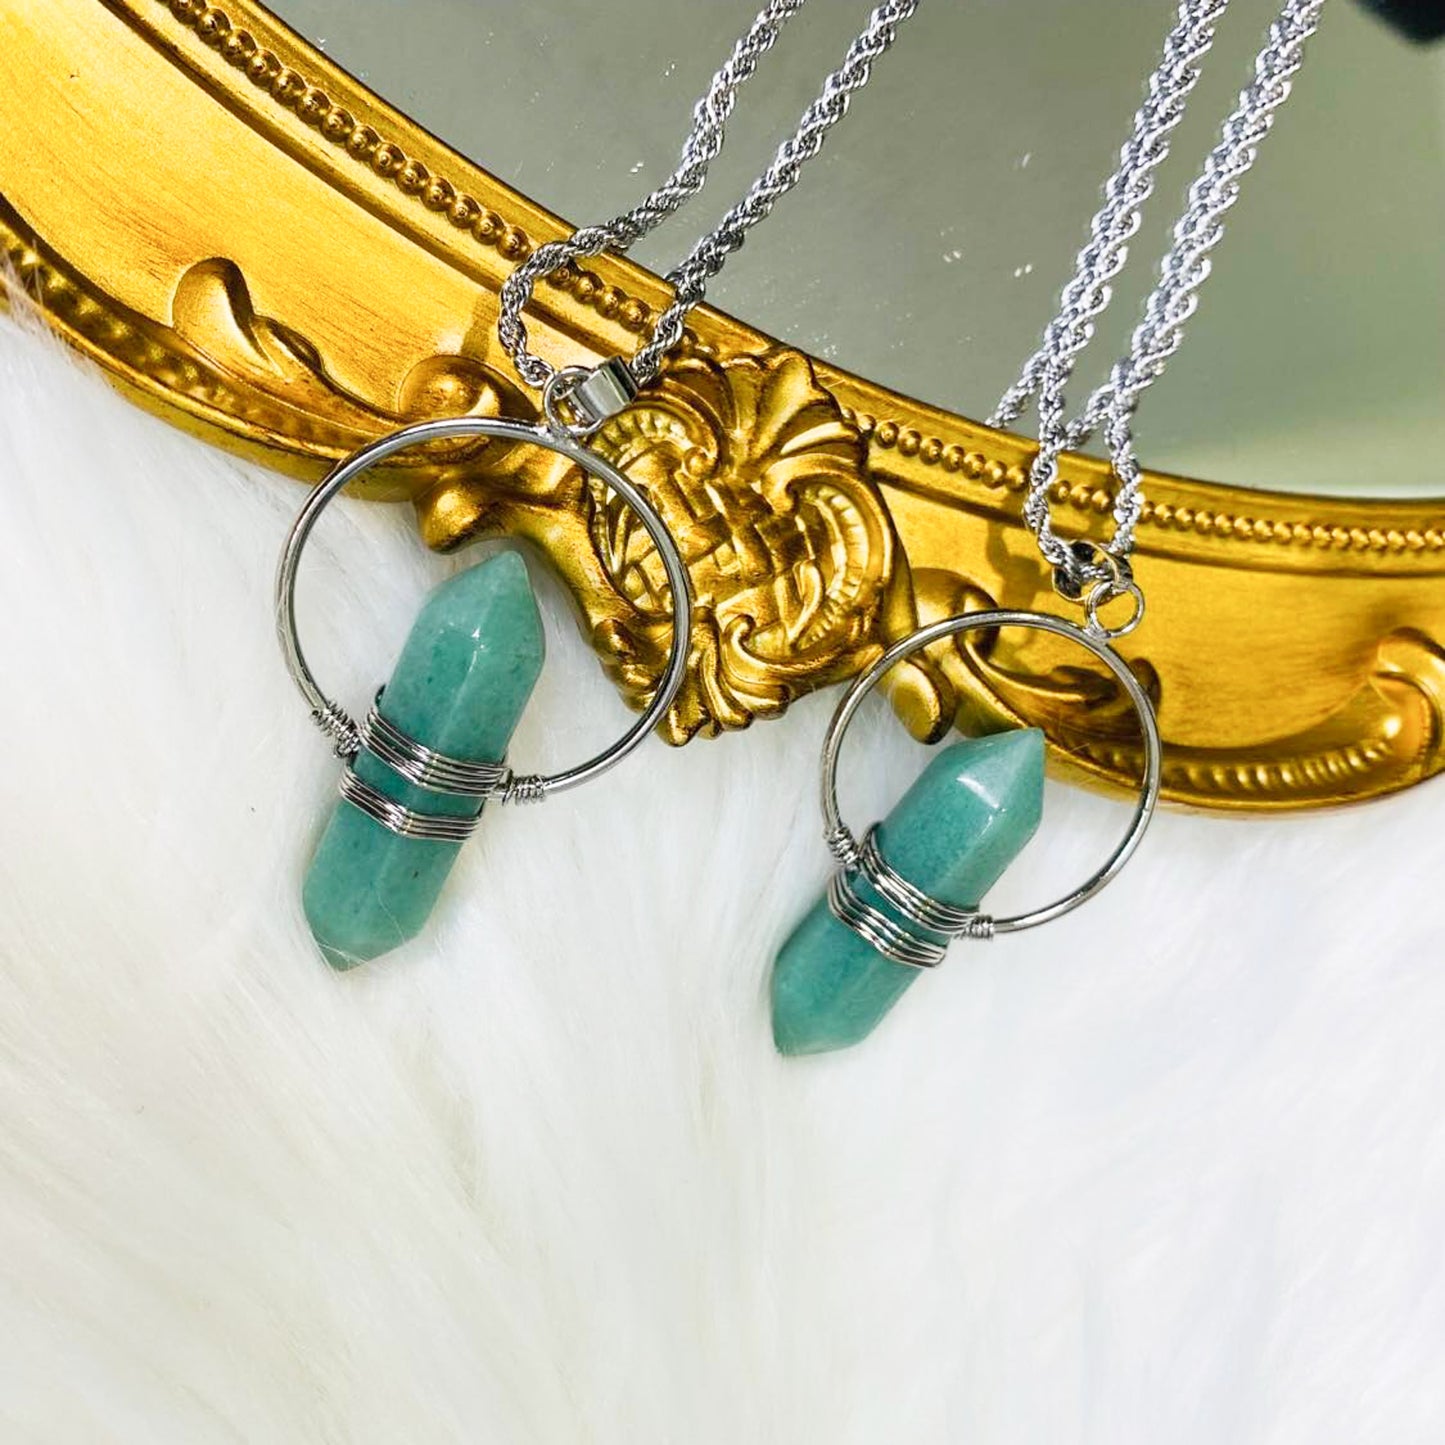 Green Aventurine Necklace with Gold Dipped Silver Chain